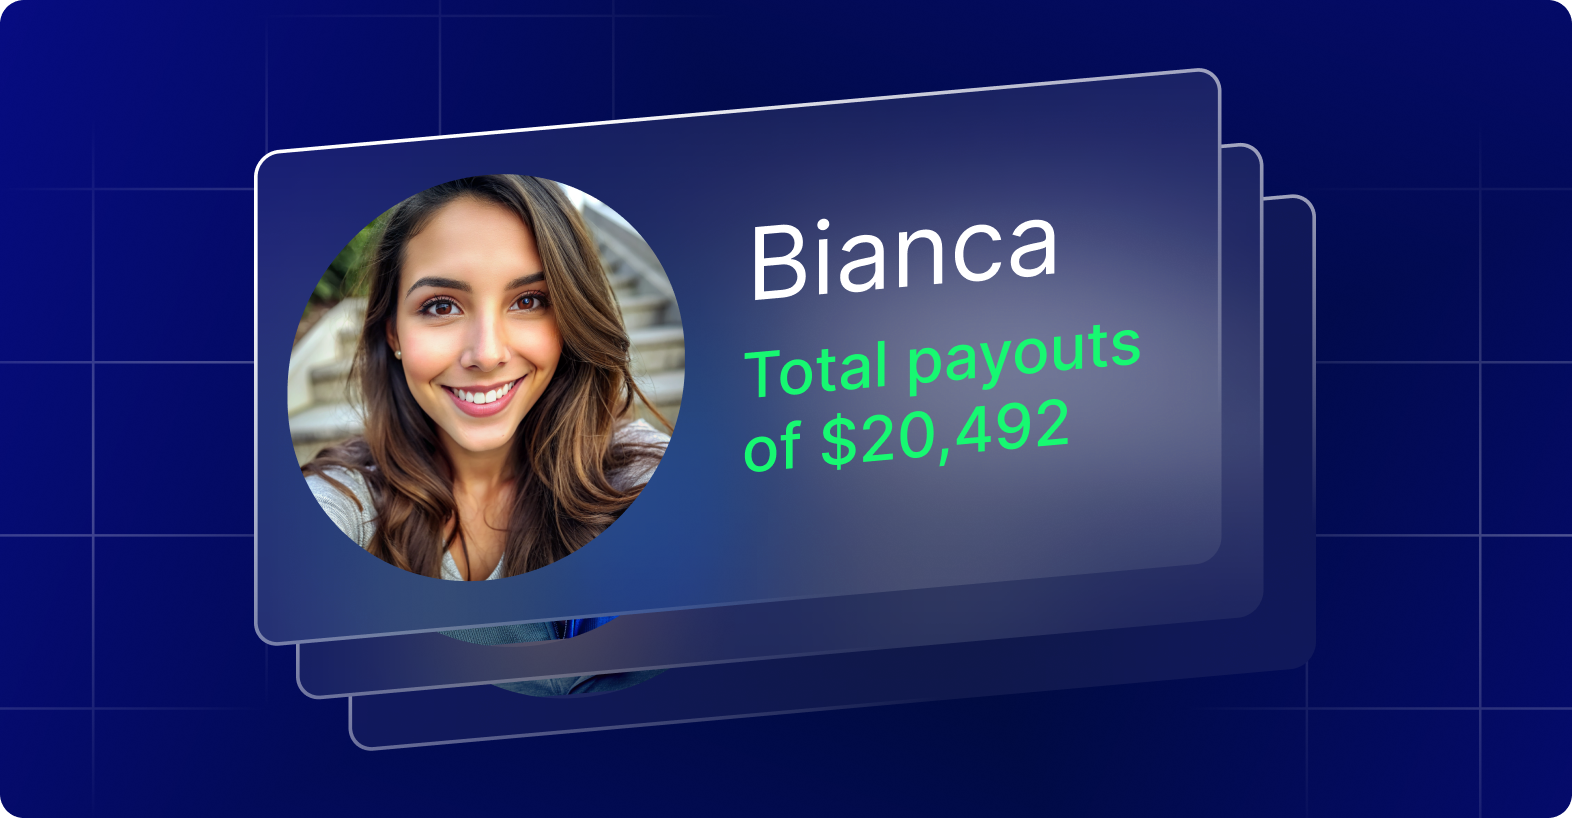 Bianca's $20,492 Achievement: Trend Trading Expertise